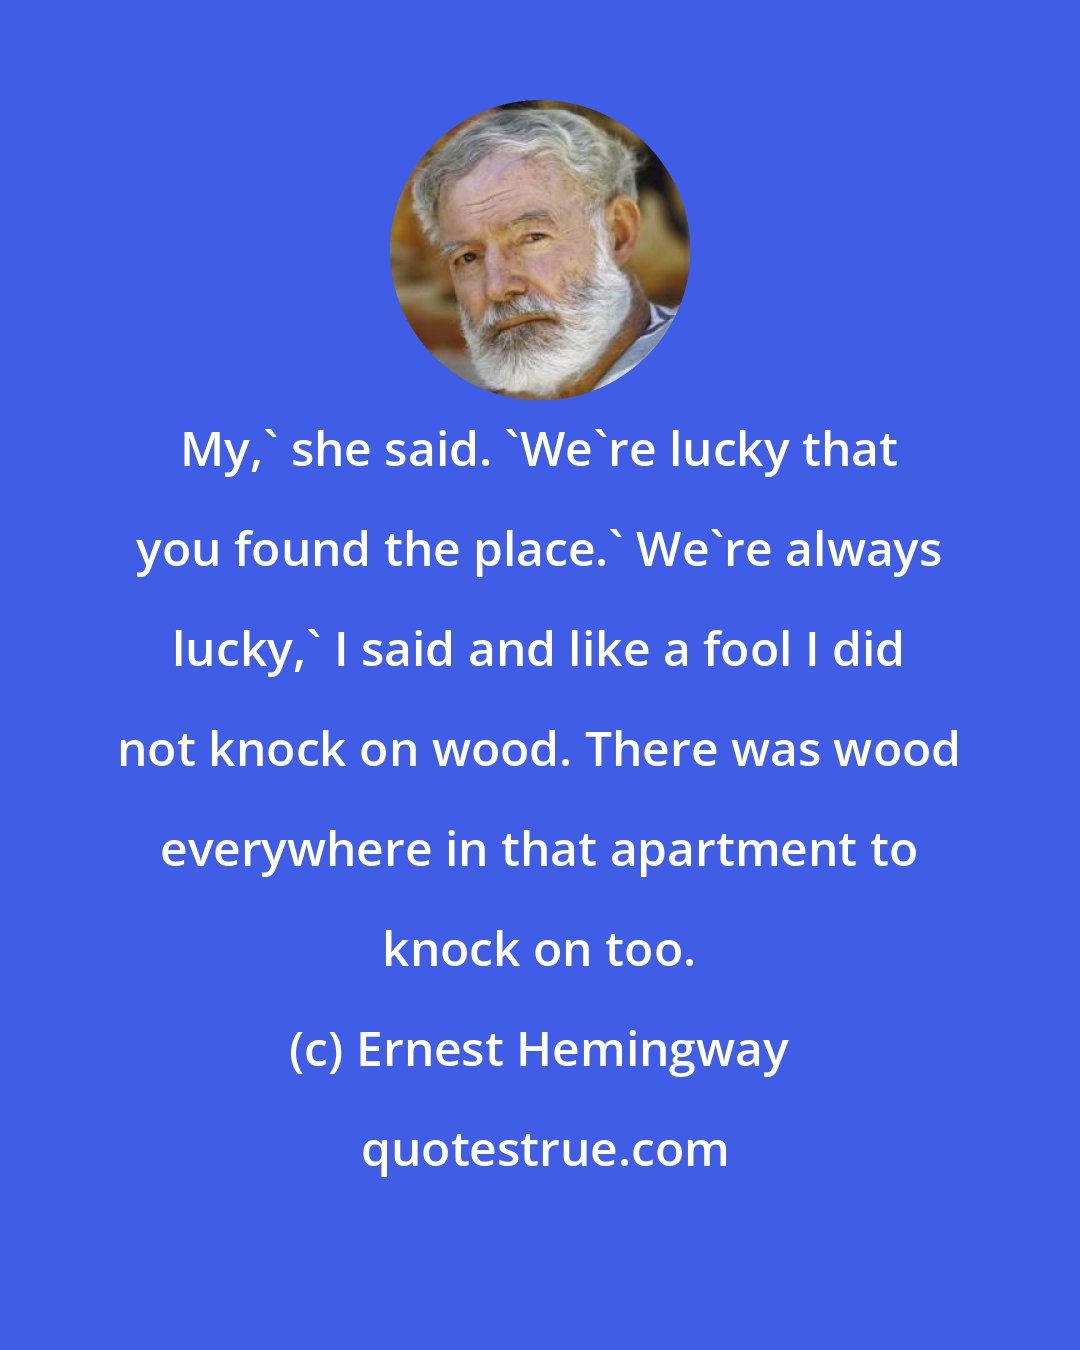 Ernest Hemingway: My,' she said. 'We're lucky that you found the place.' We're always lucky,' I said and like a fool I did not knock on wood. There was wood everywhere in that apartment to knock on too.